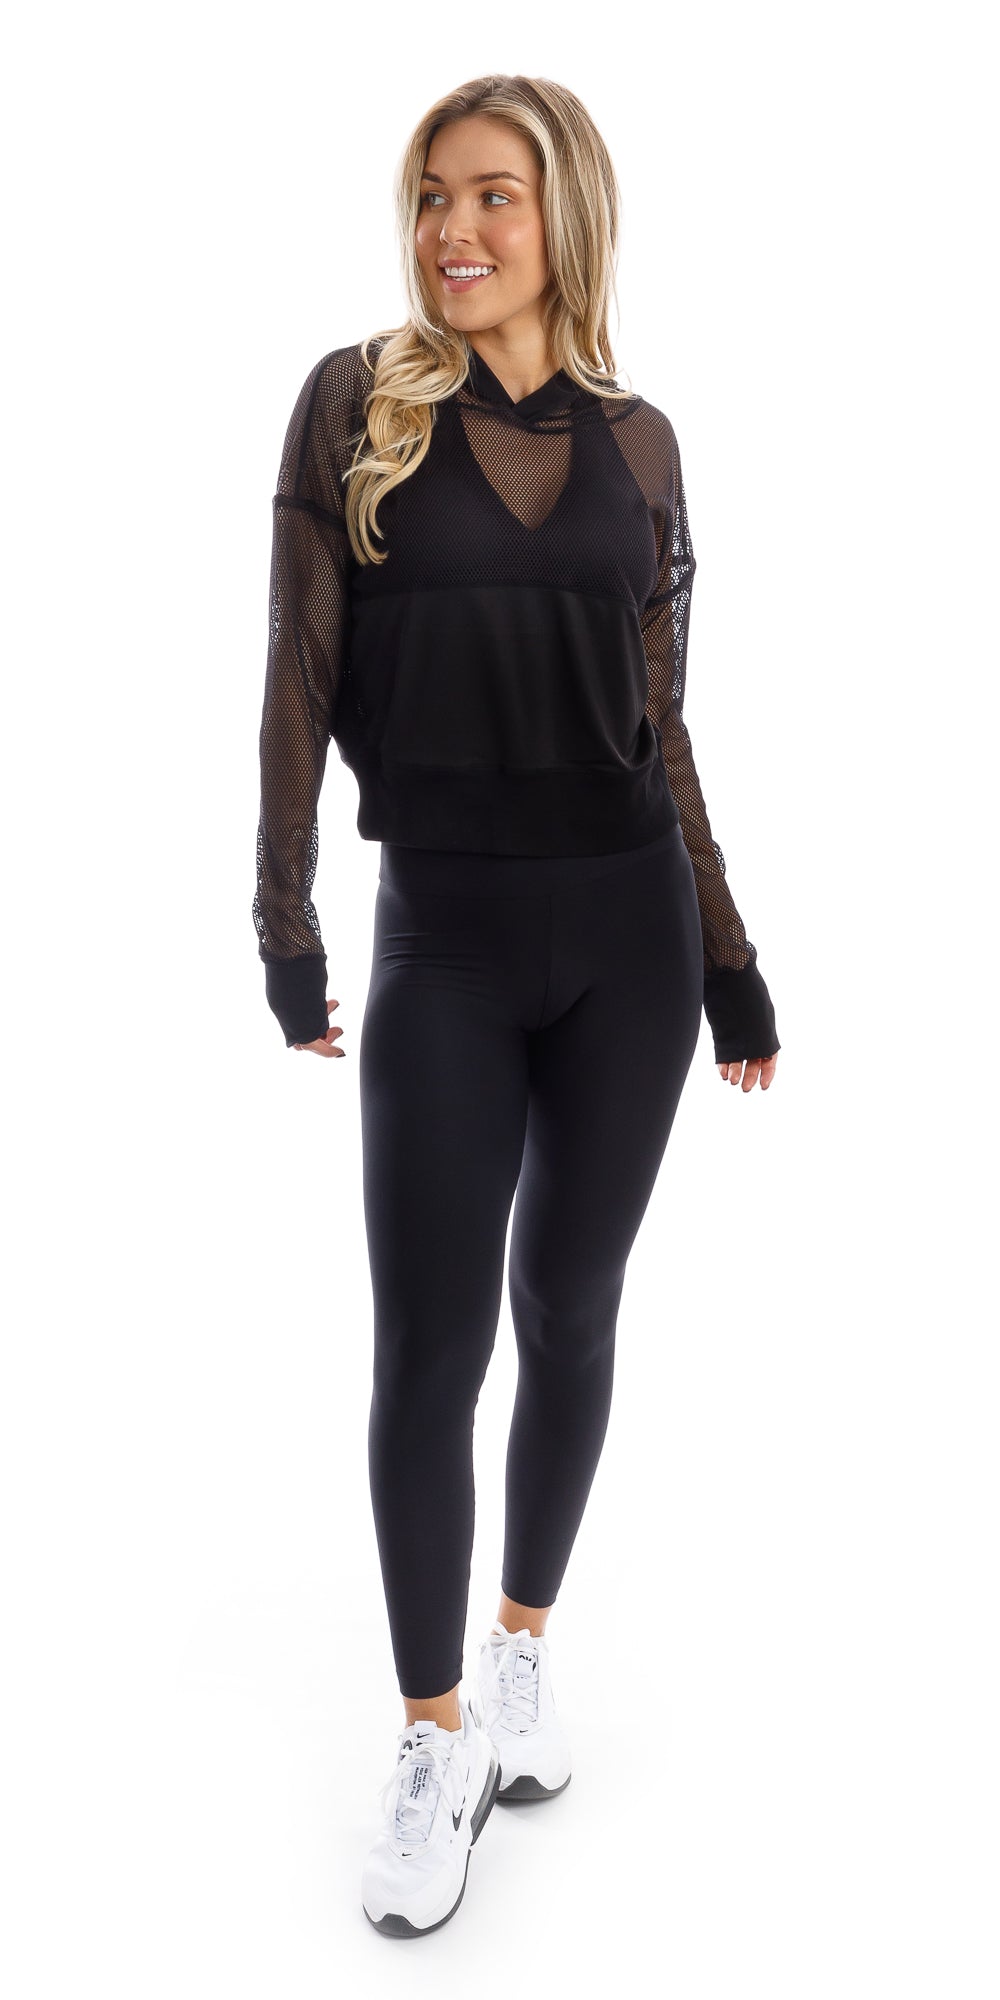 Full body front view of girl in black Midnight Meshed Hoody and black leggings putting one leg forward